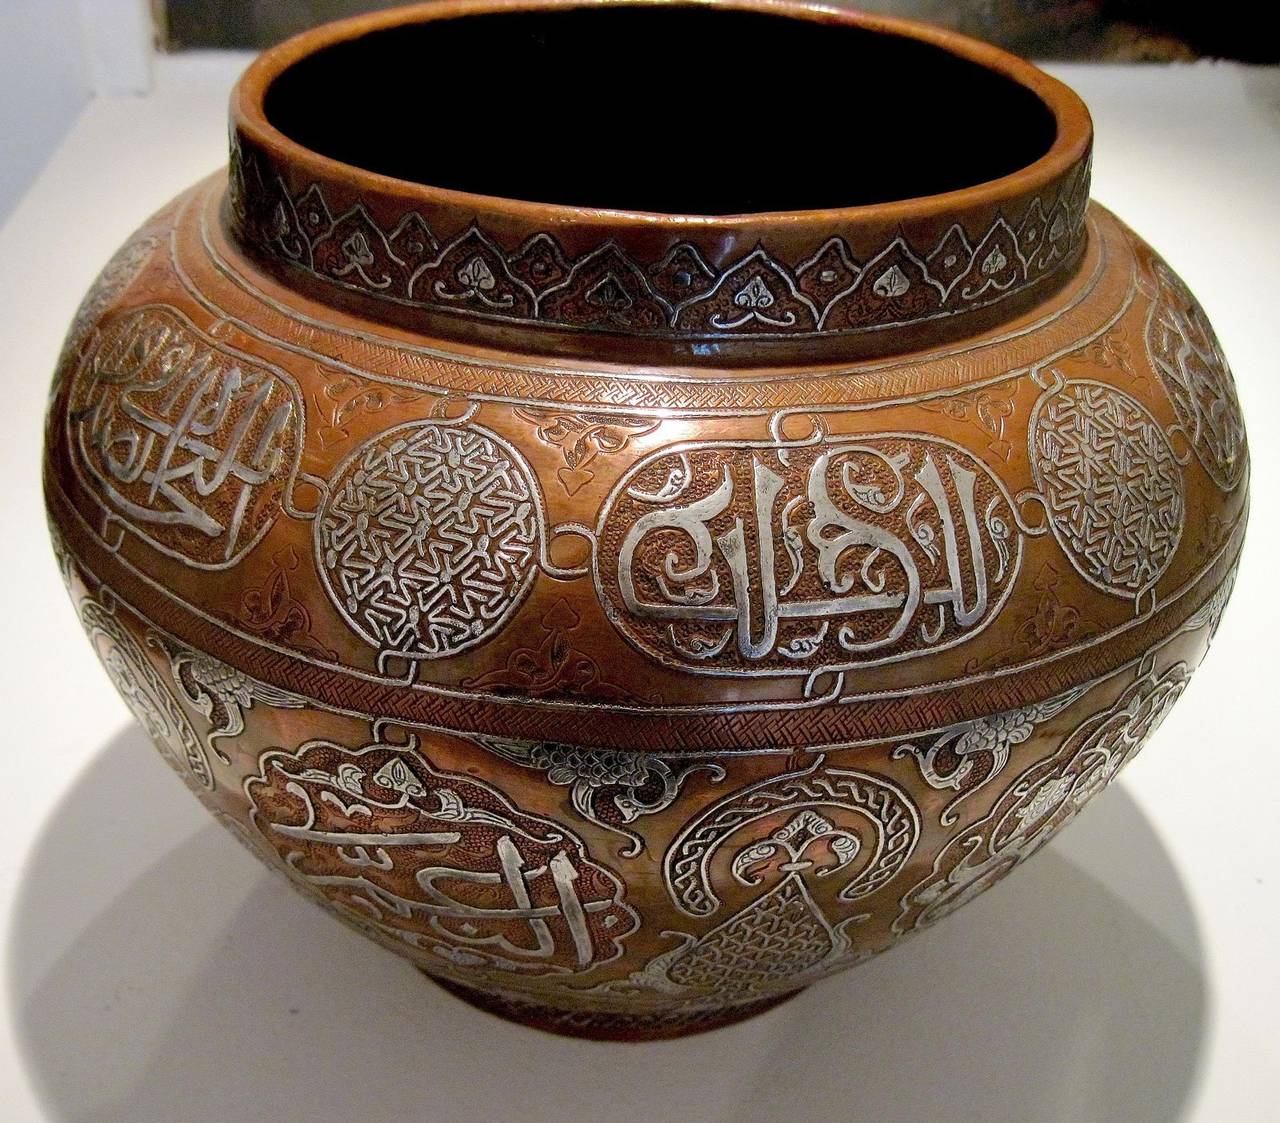 Large, impressive and highly decorative example of what is often called 'Cairoware', although most likely made in Syria, as most of these pieces were, in the 19th C. This was a time when the high level metal artistry and craftsmanship from the